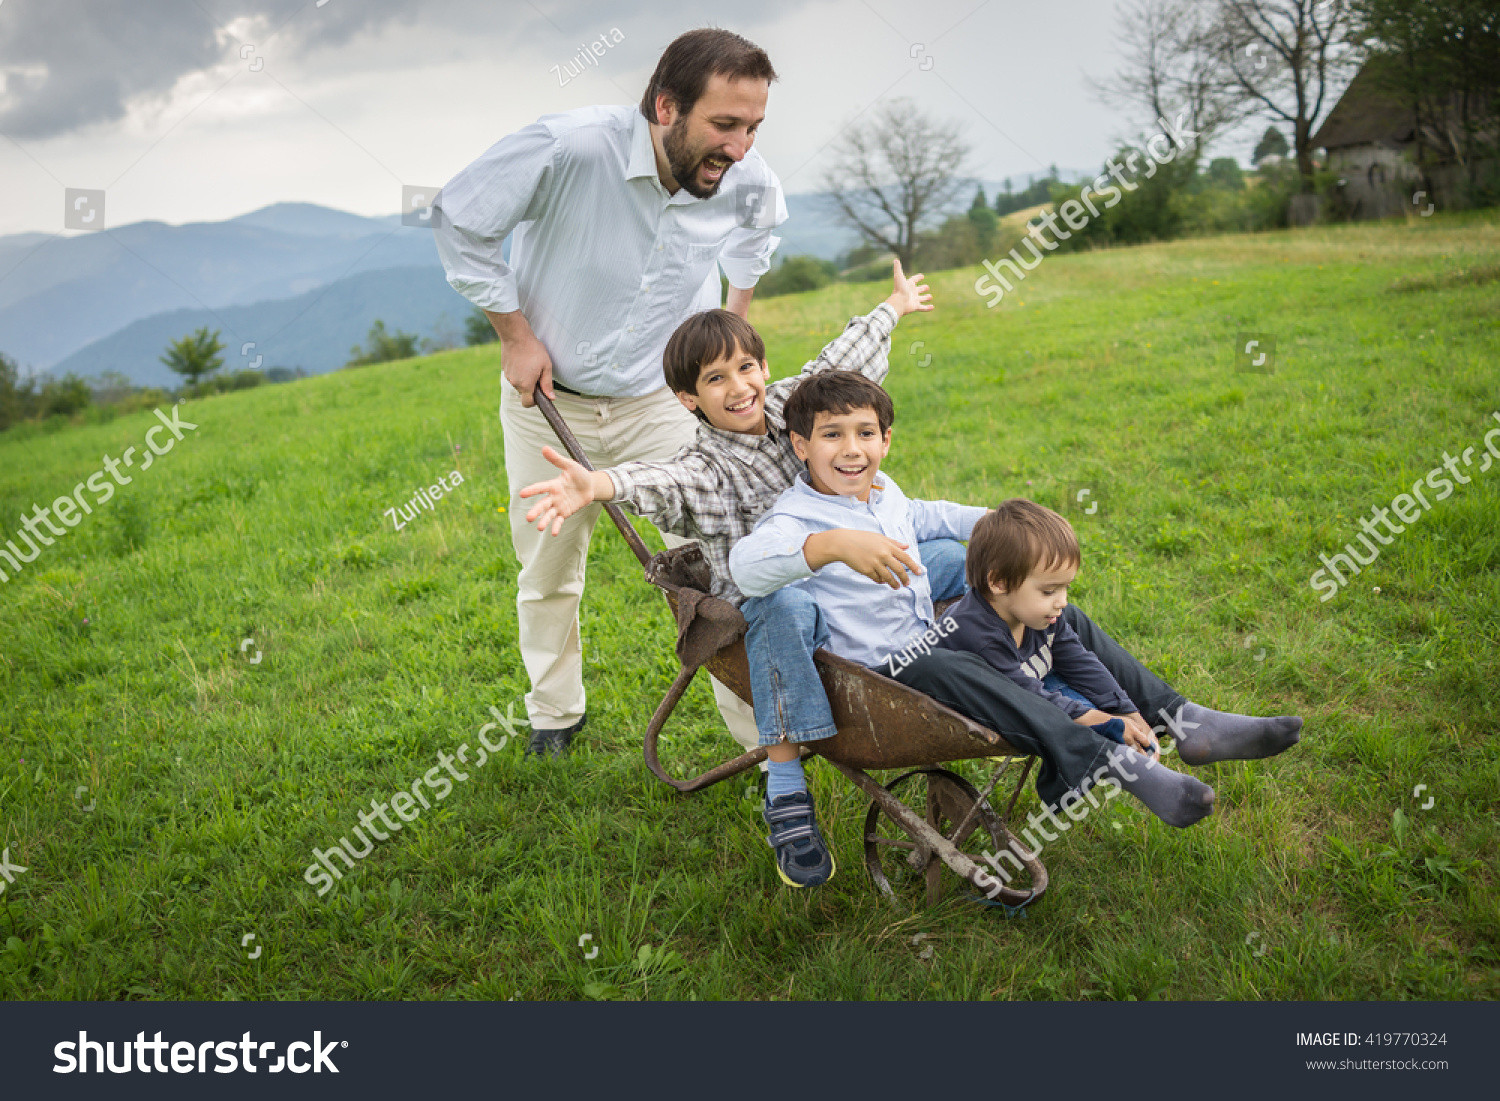 Father playing with sons using trolley on meadow #419770324